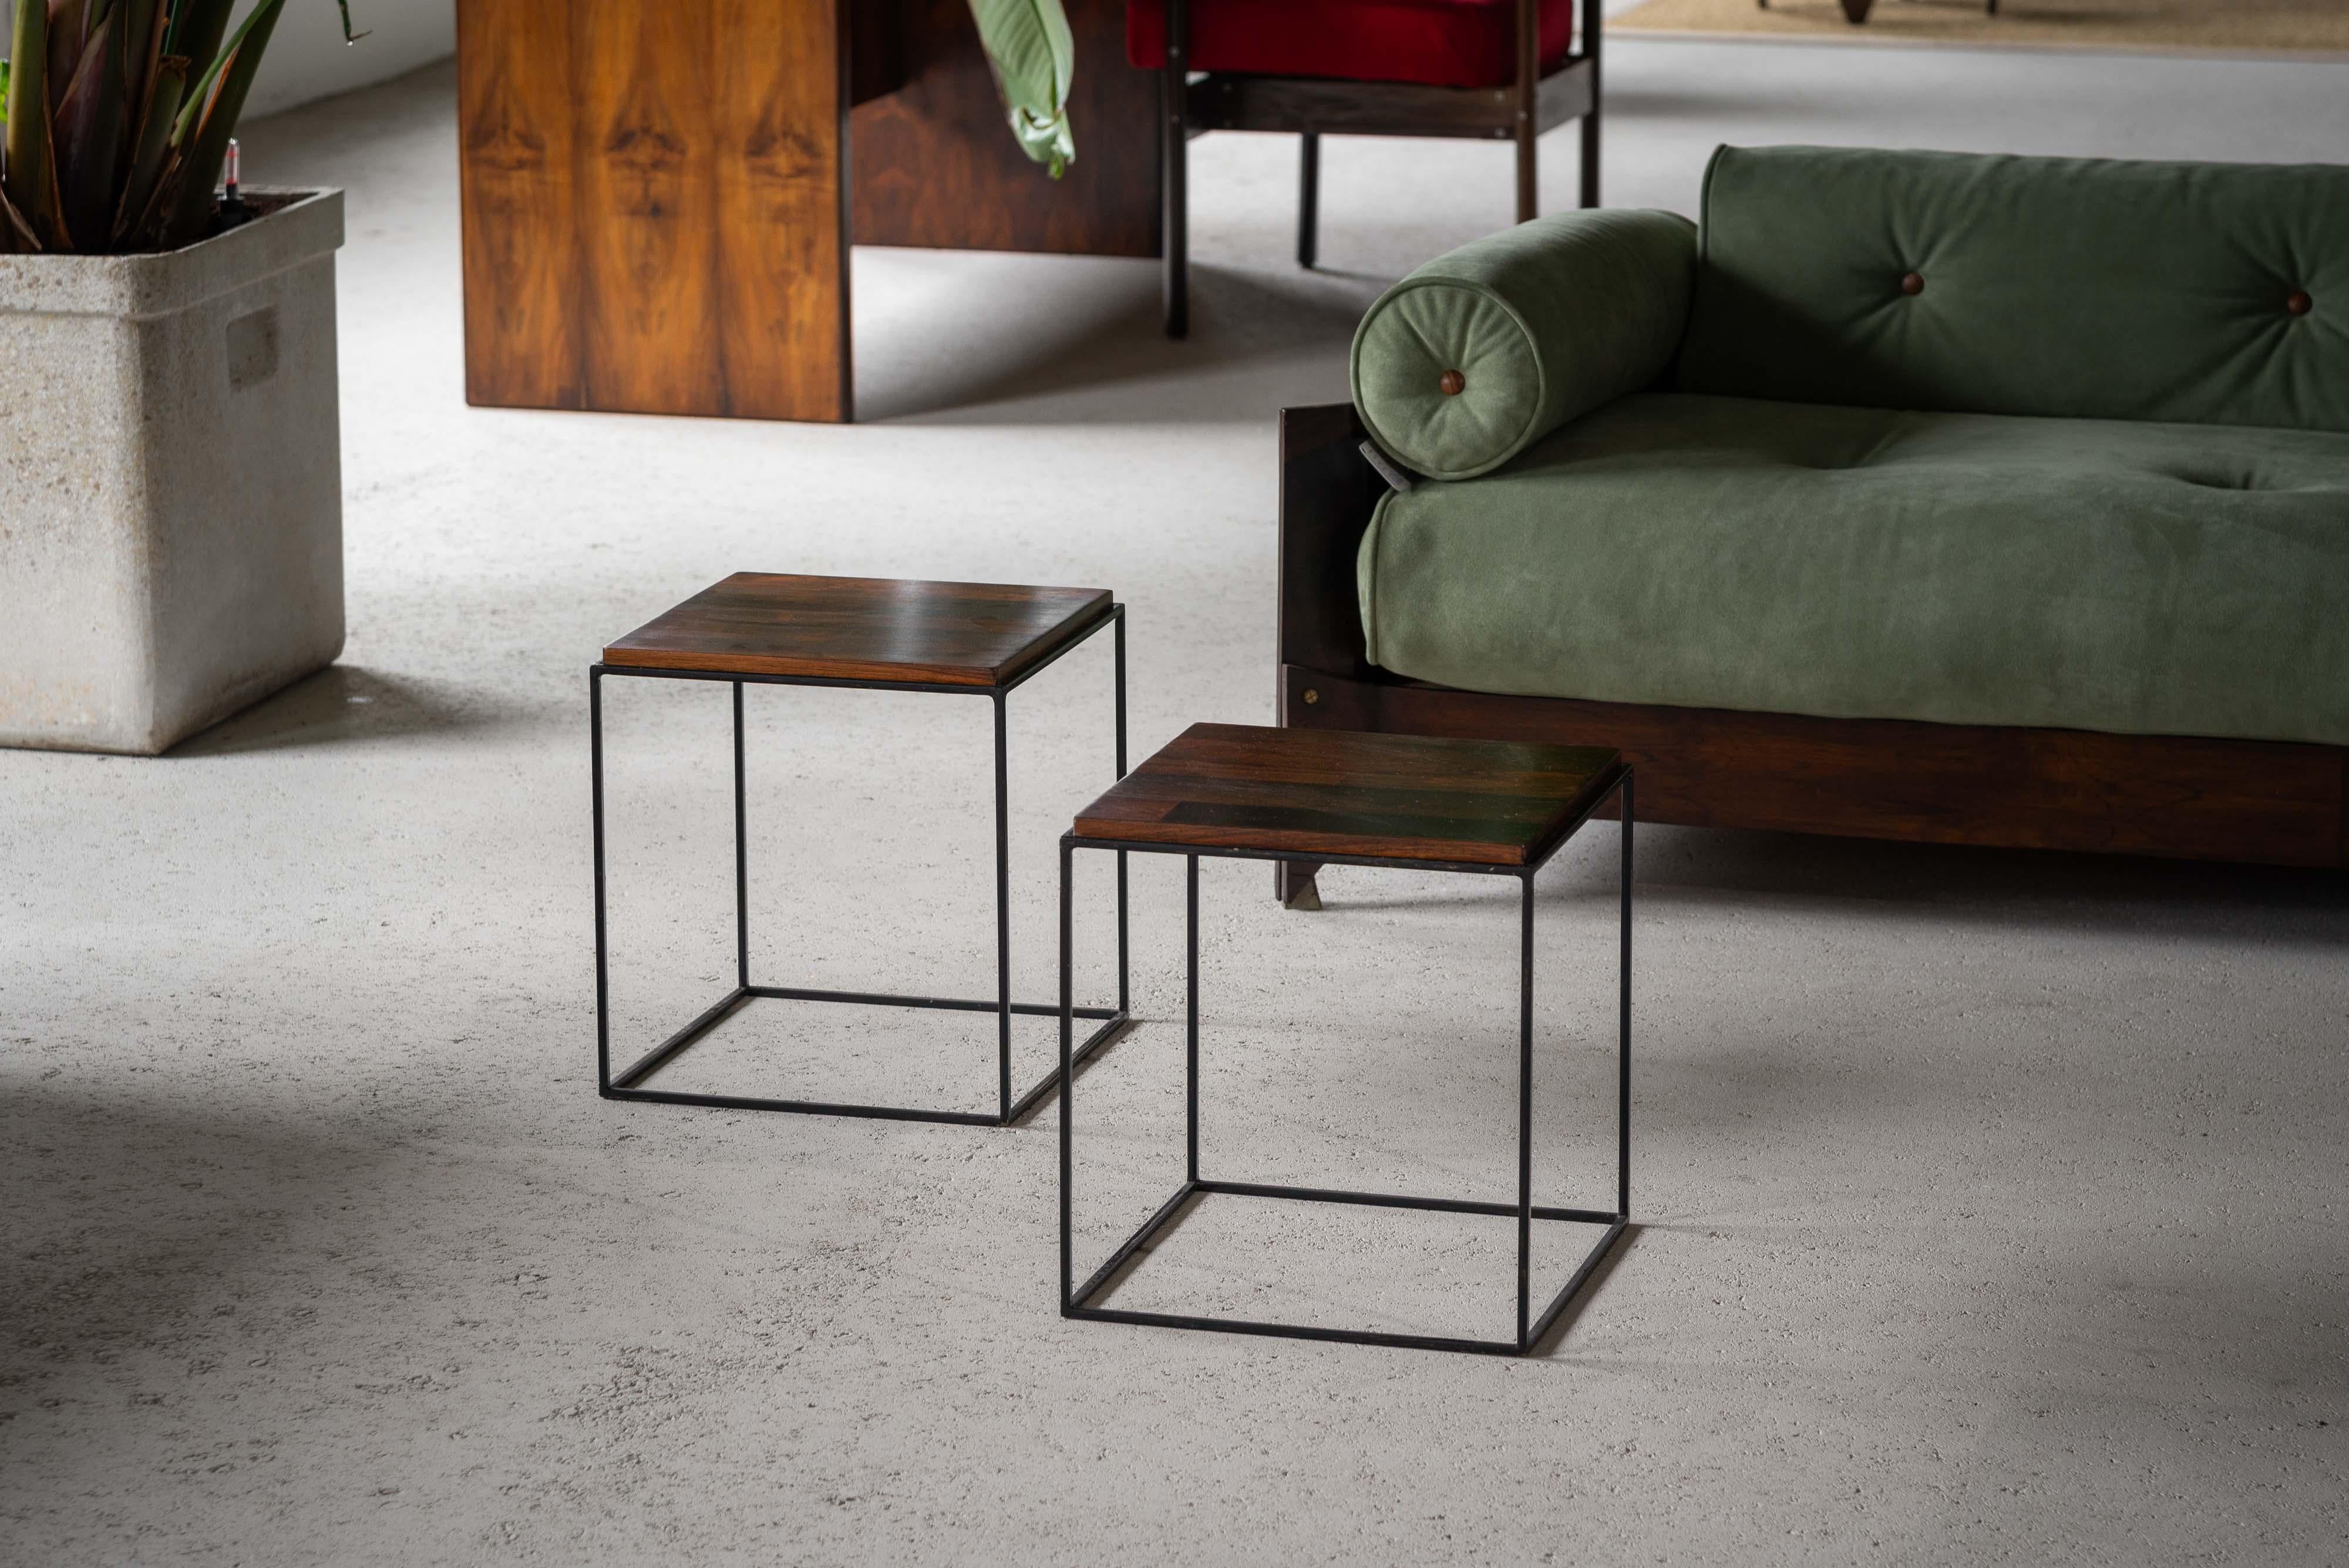 Rare pair of side tables from the 'Domino' series designed by Jorge Zalszupin and manufactured by his own factory L'Atelier, Brazil 1959. The language of the Domino line is geometric simplicity, suggesting modular combinations, like in a game of